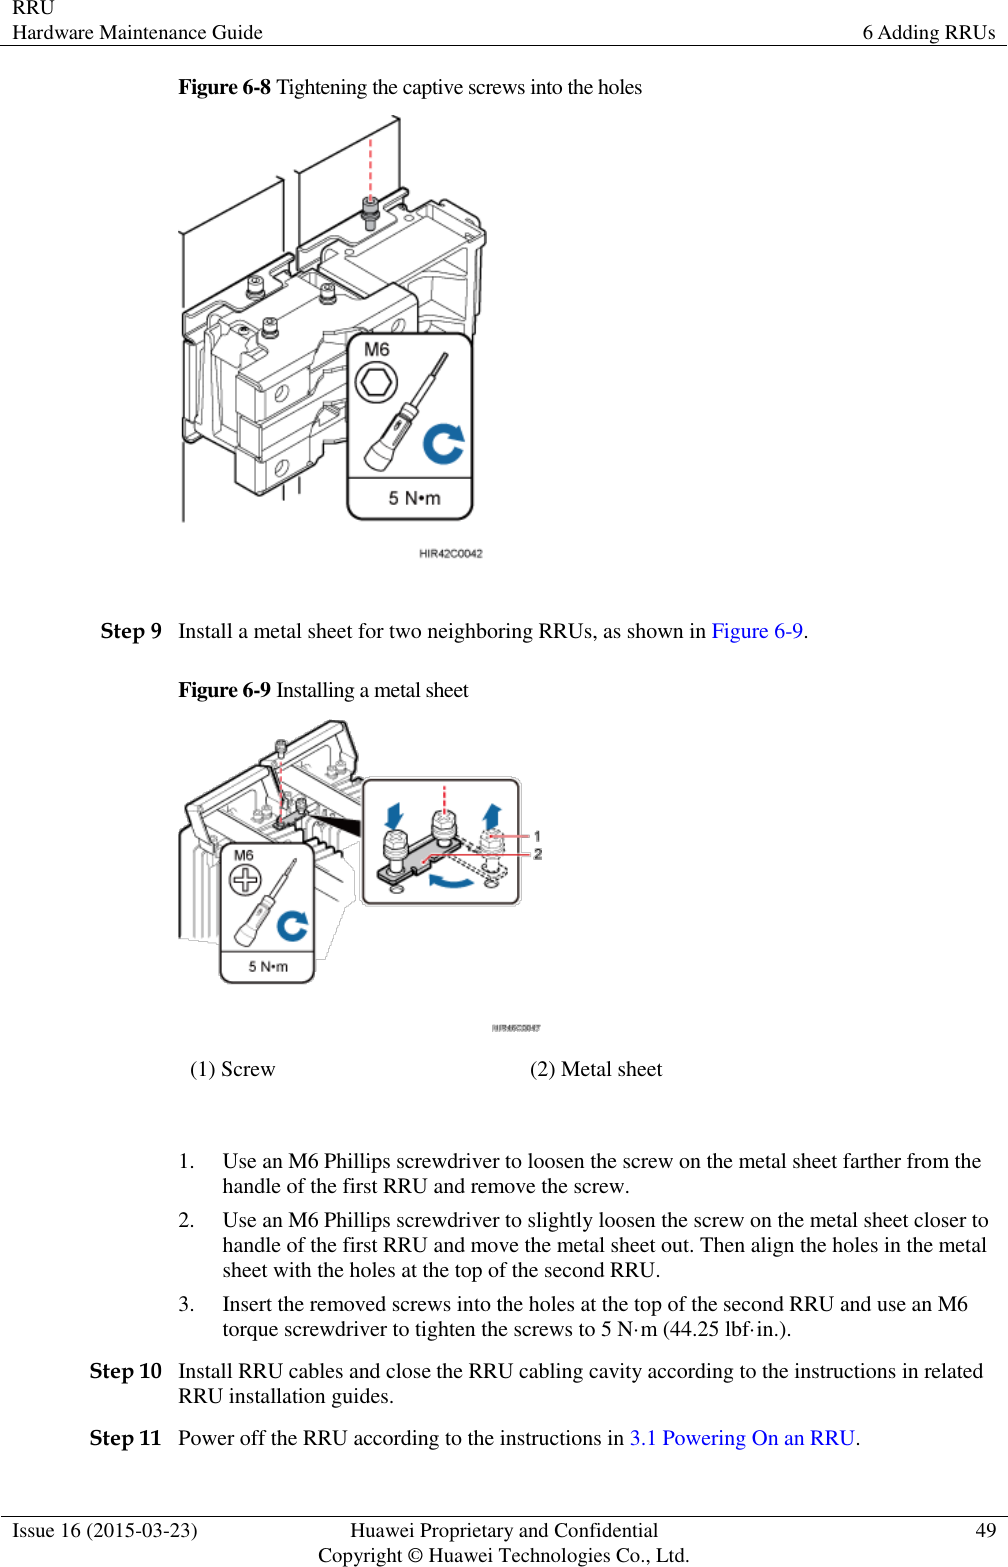 RRU Hardware Maintenance Guide 6 Adding RRUs  Issue 16 (2015-03-23) Huawei Proprietary and Confidential                                     Copyright © Huawei Technologies Co., Ltd. 49  Figure 6-8 Tightening the captive screws into the holes   Step 9 Install a metal sheet for two neighboring RRUs, as shown in Figure 6-9. Figure 6-9 Installing a metal sheet  (1) Screw (2) Metal sheet  1. Use an M6 Phillips screwdriver to loosen the screw on the metal sheet farther from the handle of the first RRU and remove the screw. 2. Use an M6 Phillips screwdriver to slightly loosen the screw on the metal sheet closer to handle of the first RRU and move the metal sheet out. Then align the holes in the metal sheet with the holes at the top of the second RRU. 3. Insert the removed screws into the holes at the top of the second RRU and use an M6 torque screwdriver to tighten the screws to 5 N·m (44.25 lbf·in.). Step 10 Install RRU cables and close the RRU cabling cavity according to the instructions in related RRU installation guides. Step 11 Power off the RRU according to the instructions in 3.1 Powering On an RRU. 